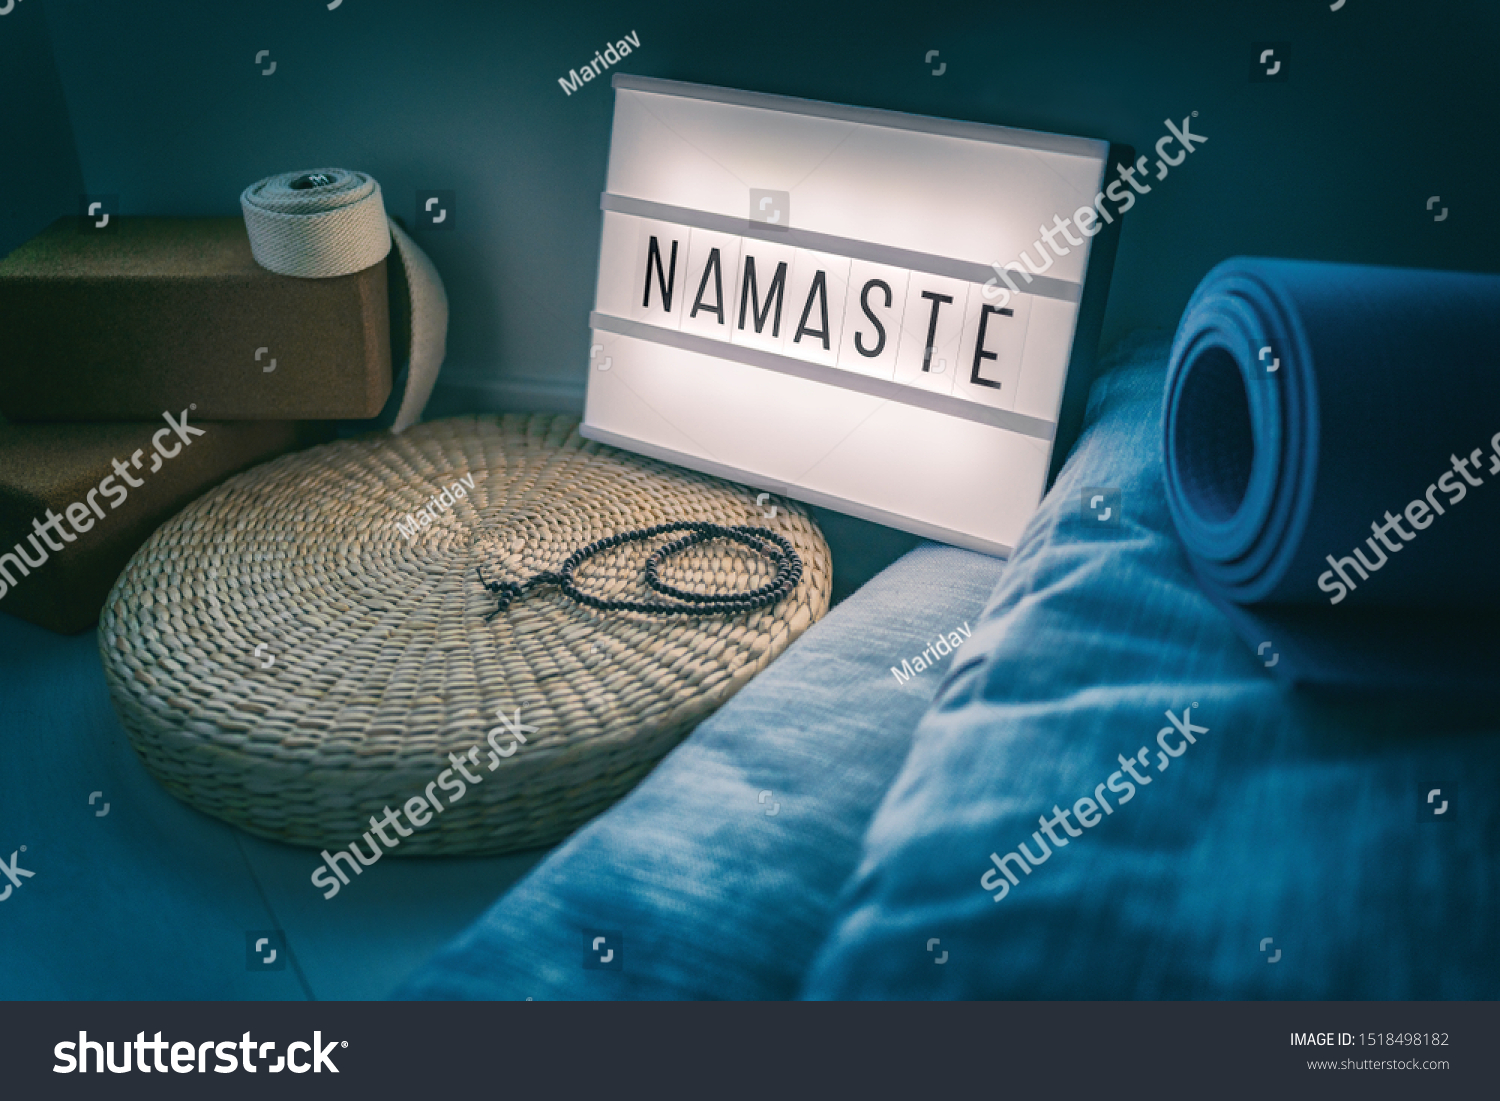 Yoga studio class sign lightbox with letters writing NAMASTE glowing in the night light with natural accessories, rubber mat, cork blocks, organic cotton strap and pillows, straw meditation pillow. #1518498182